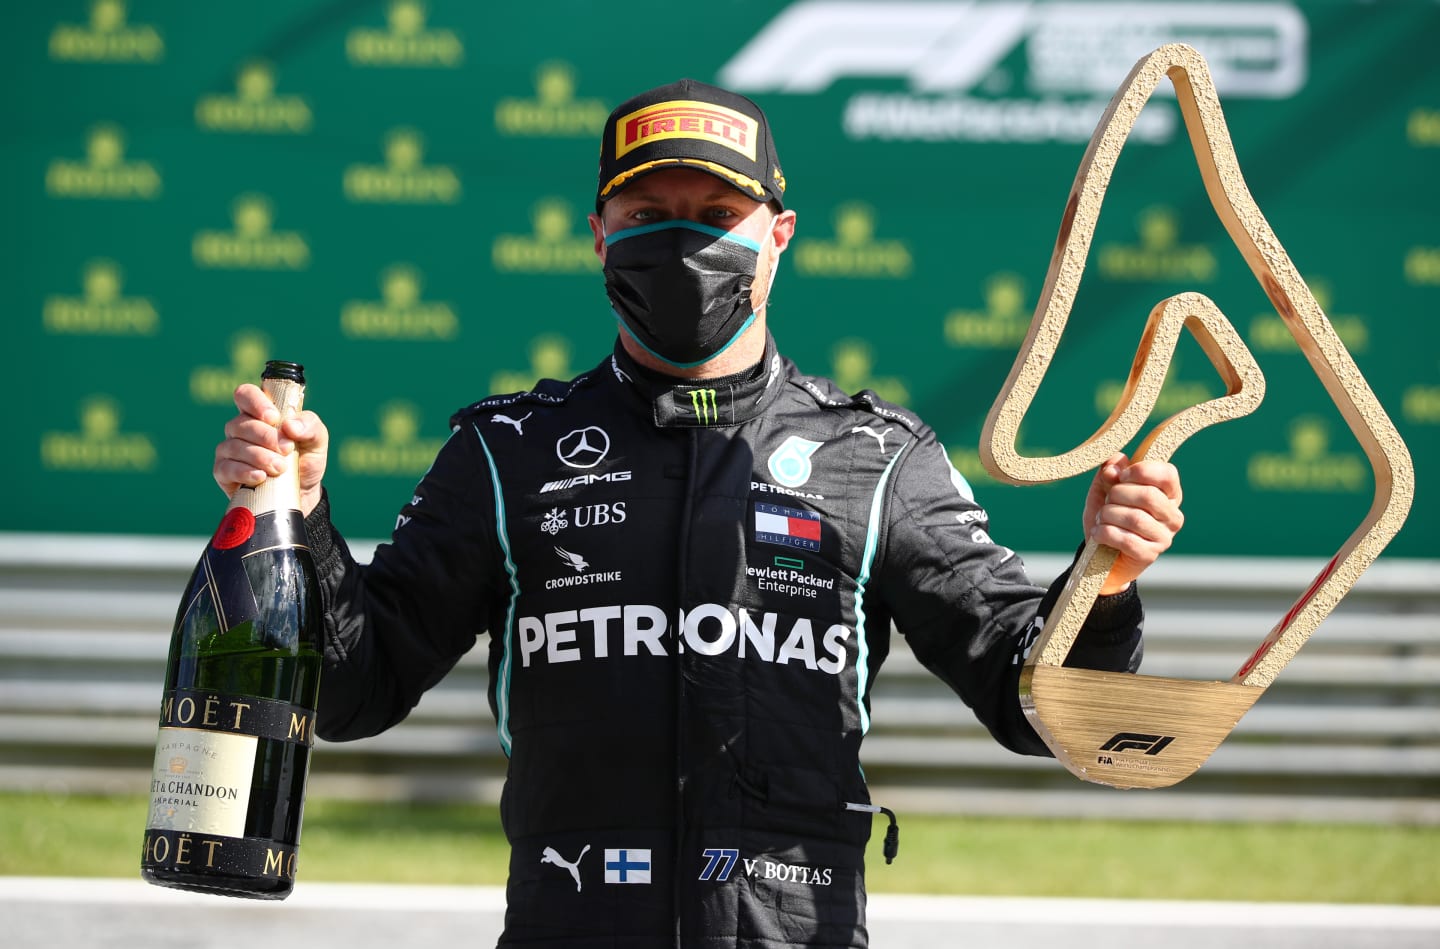 SPIELBERG, AUSTRIA - JULY 05: Race winner Valtteri Bottas of Finland and Mercedes GP poses with the